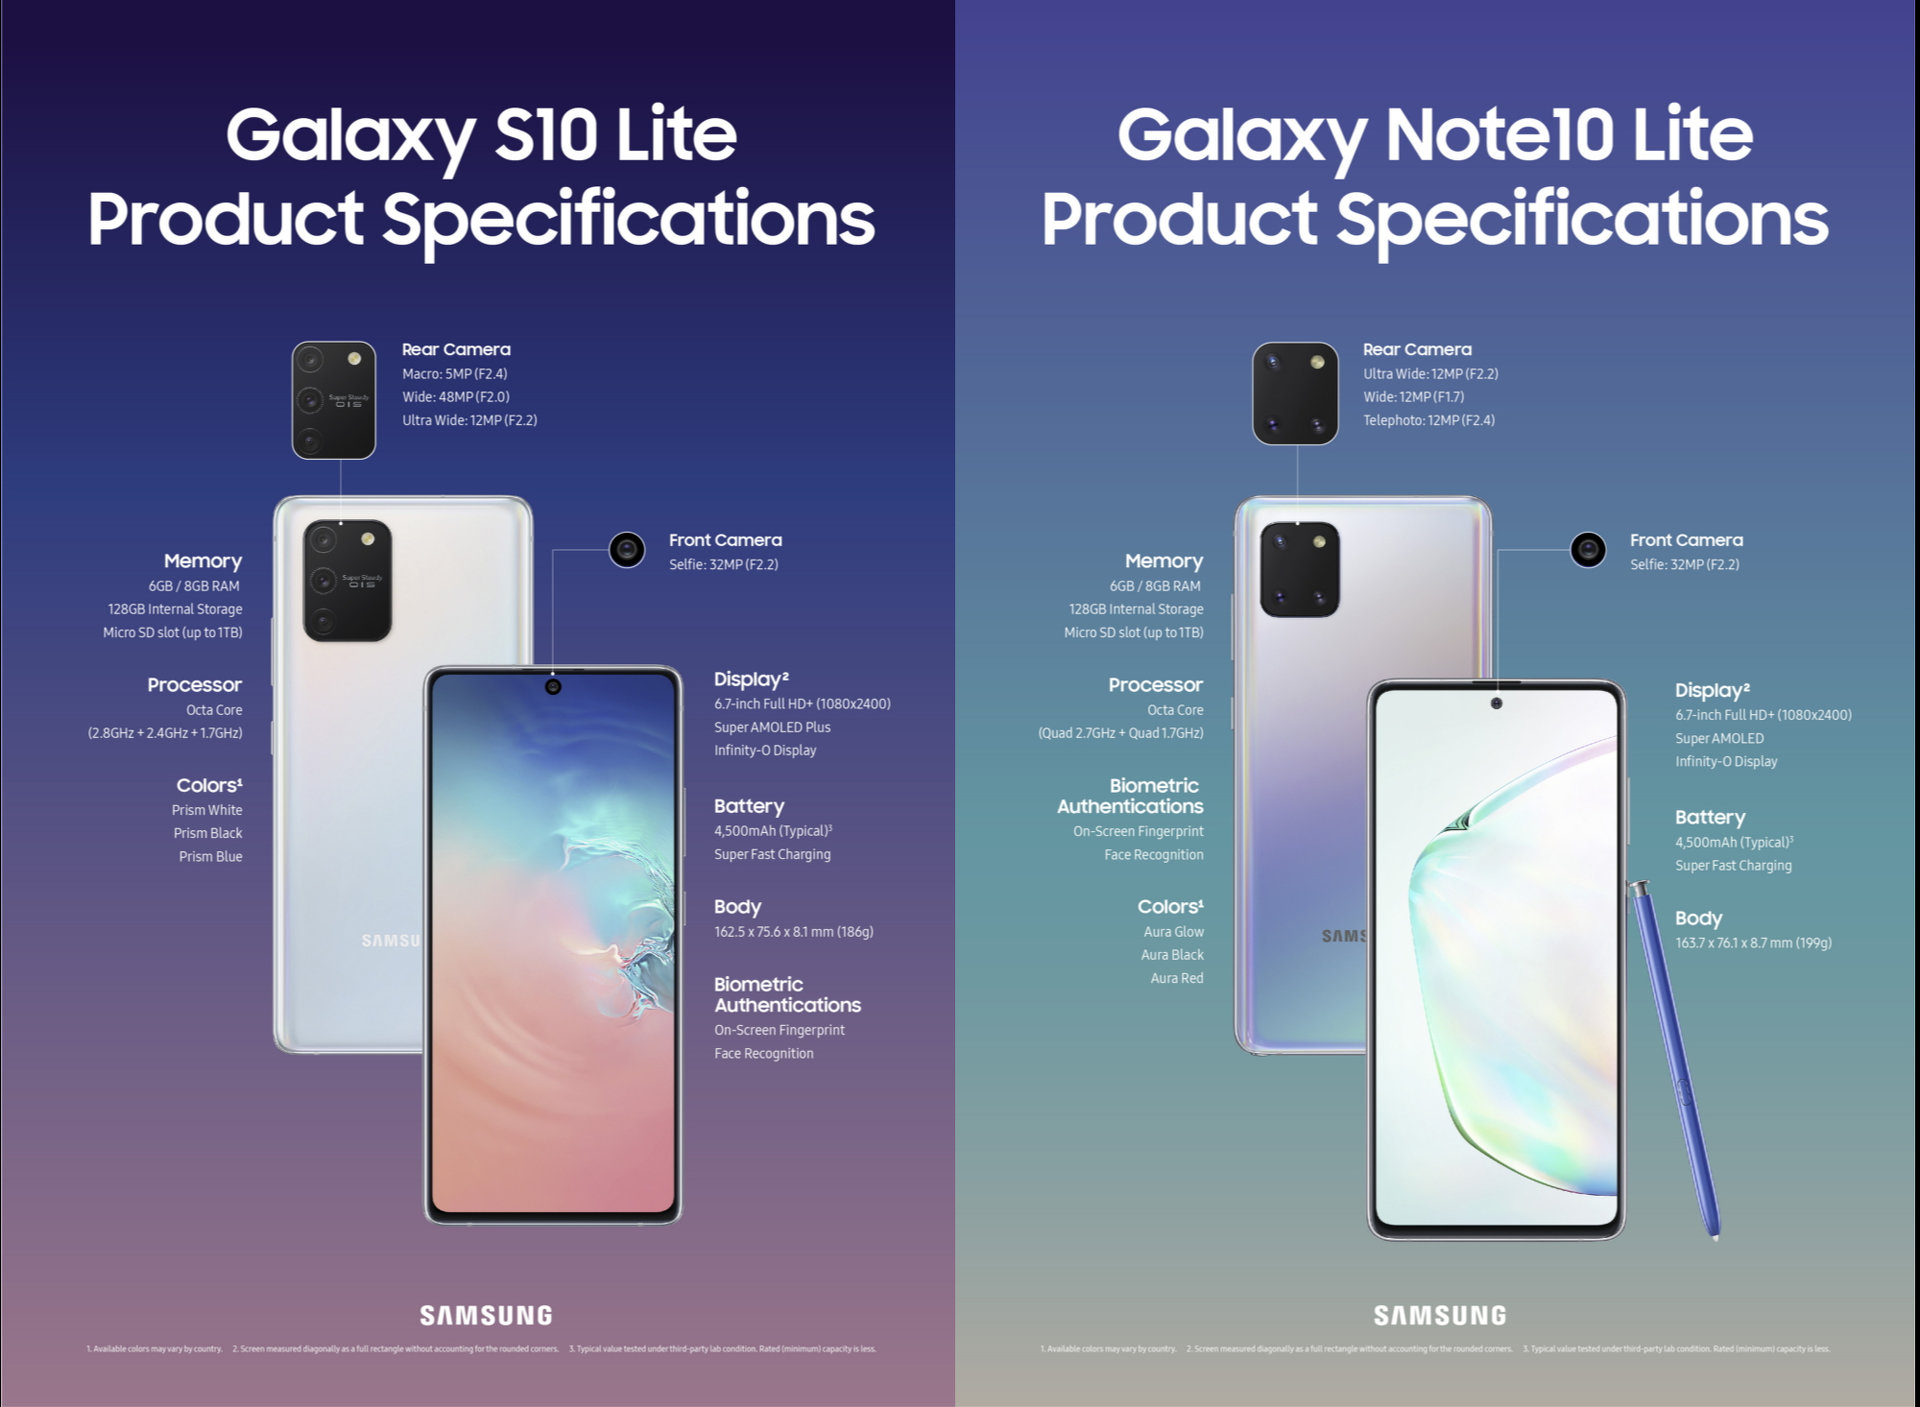 Galaxy s10 note. Samsung Galaxy s10 Note. Samsung Galaxy s10 Lite. Samsung Galaxy Note s10 5g. Samsung Galaxy s 10 Лайт.